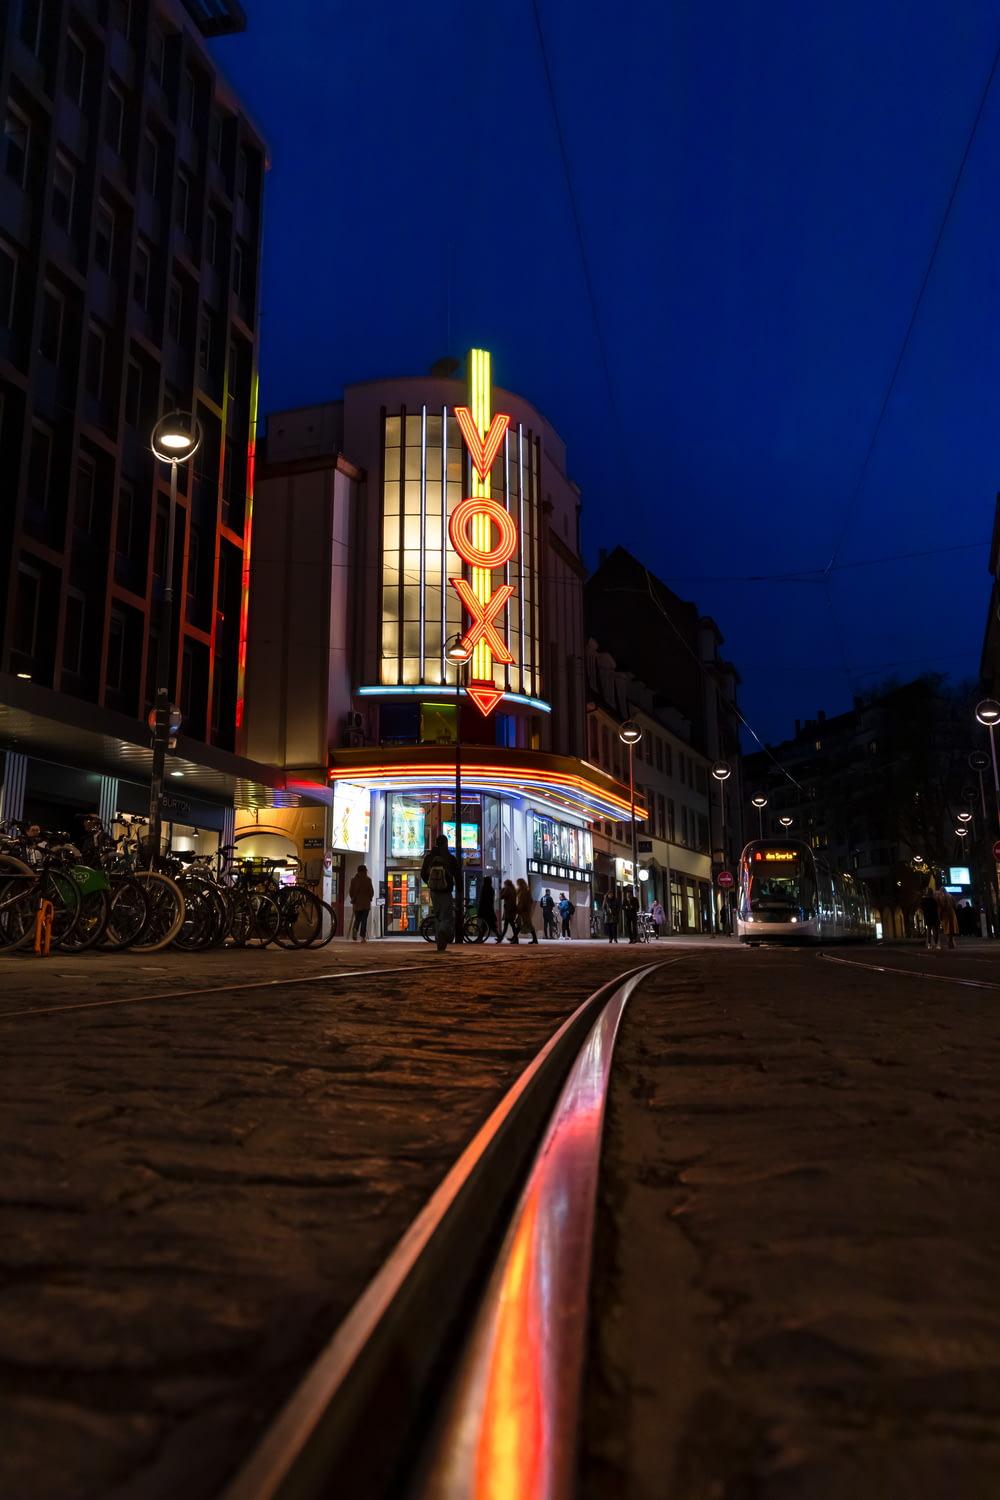 a train track in front of a building at night